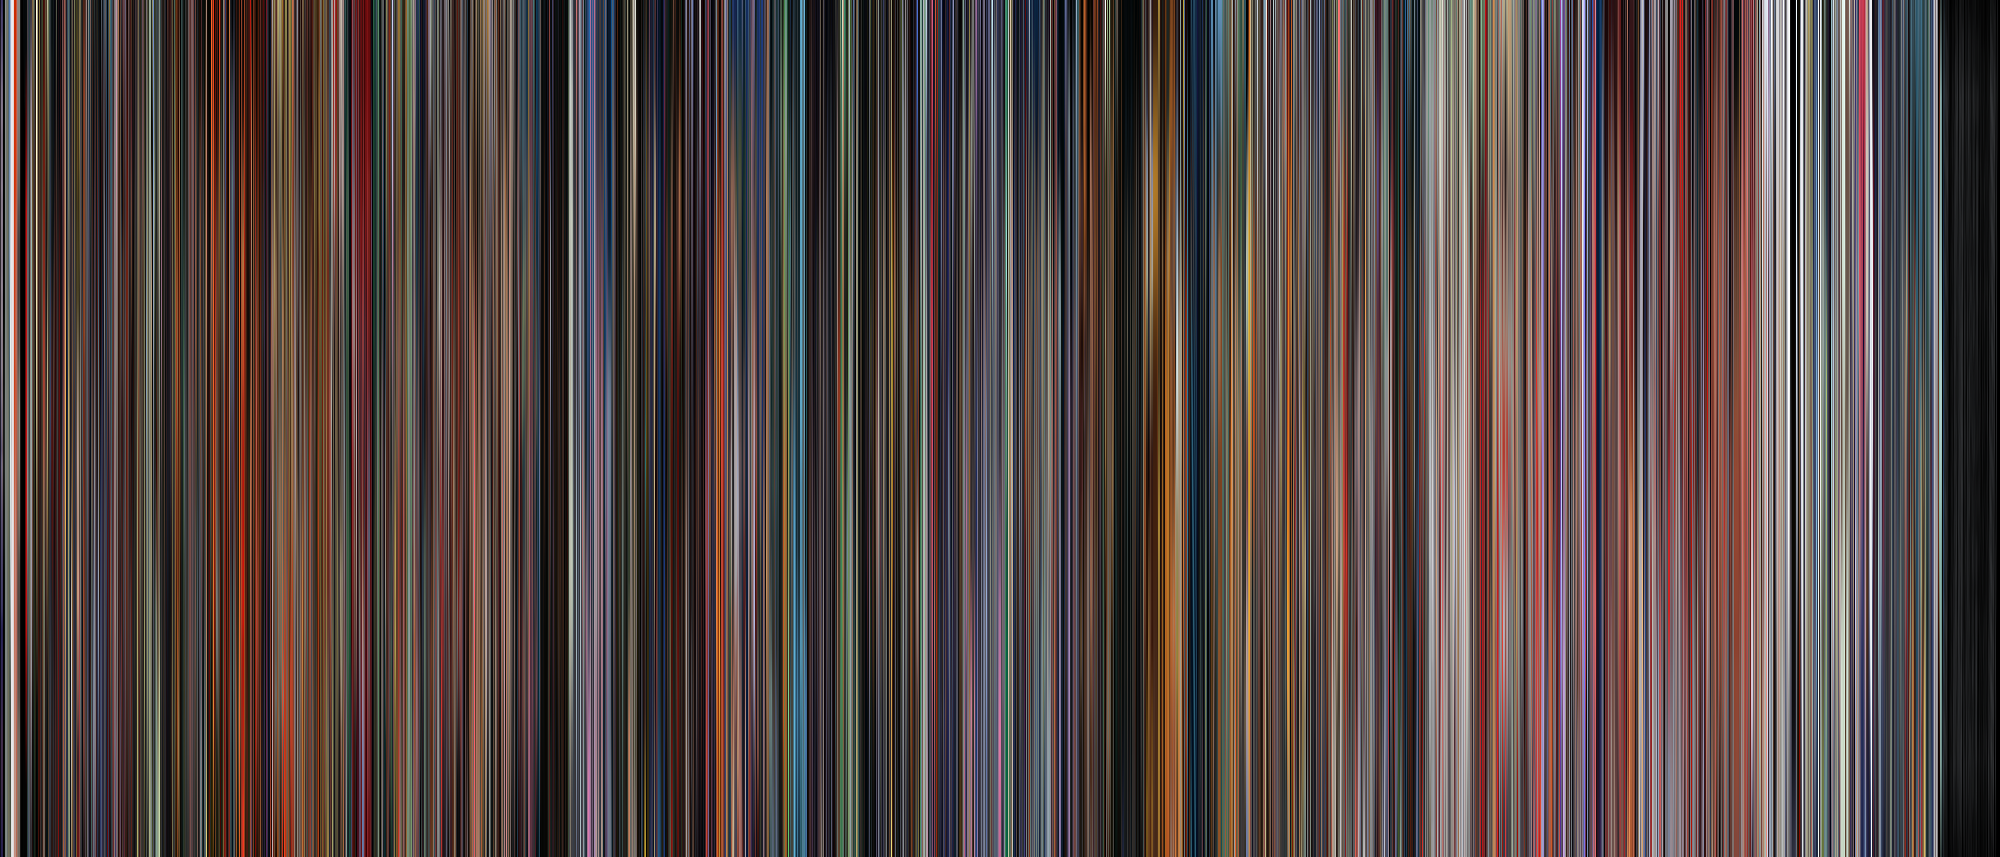 Akira barcode, generated with smoothing set to 30 at 7467 x 3200 and scaled down to 2000.